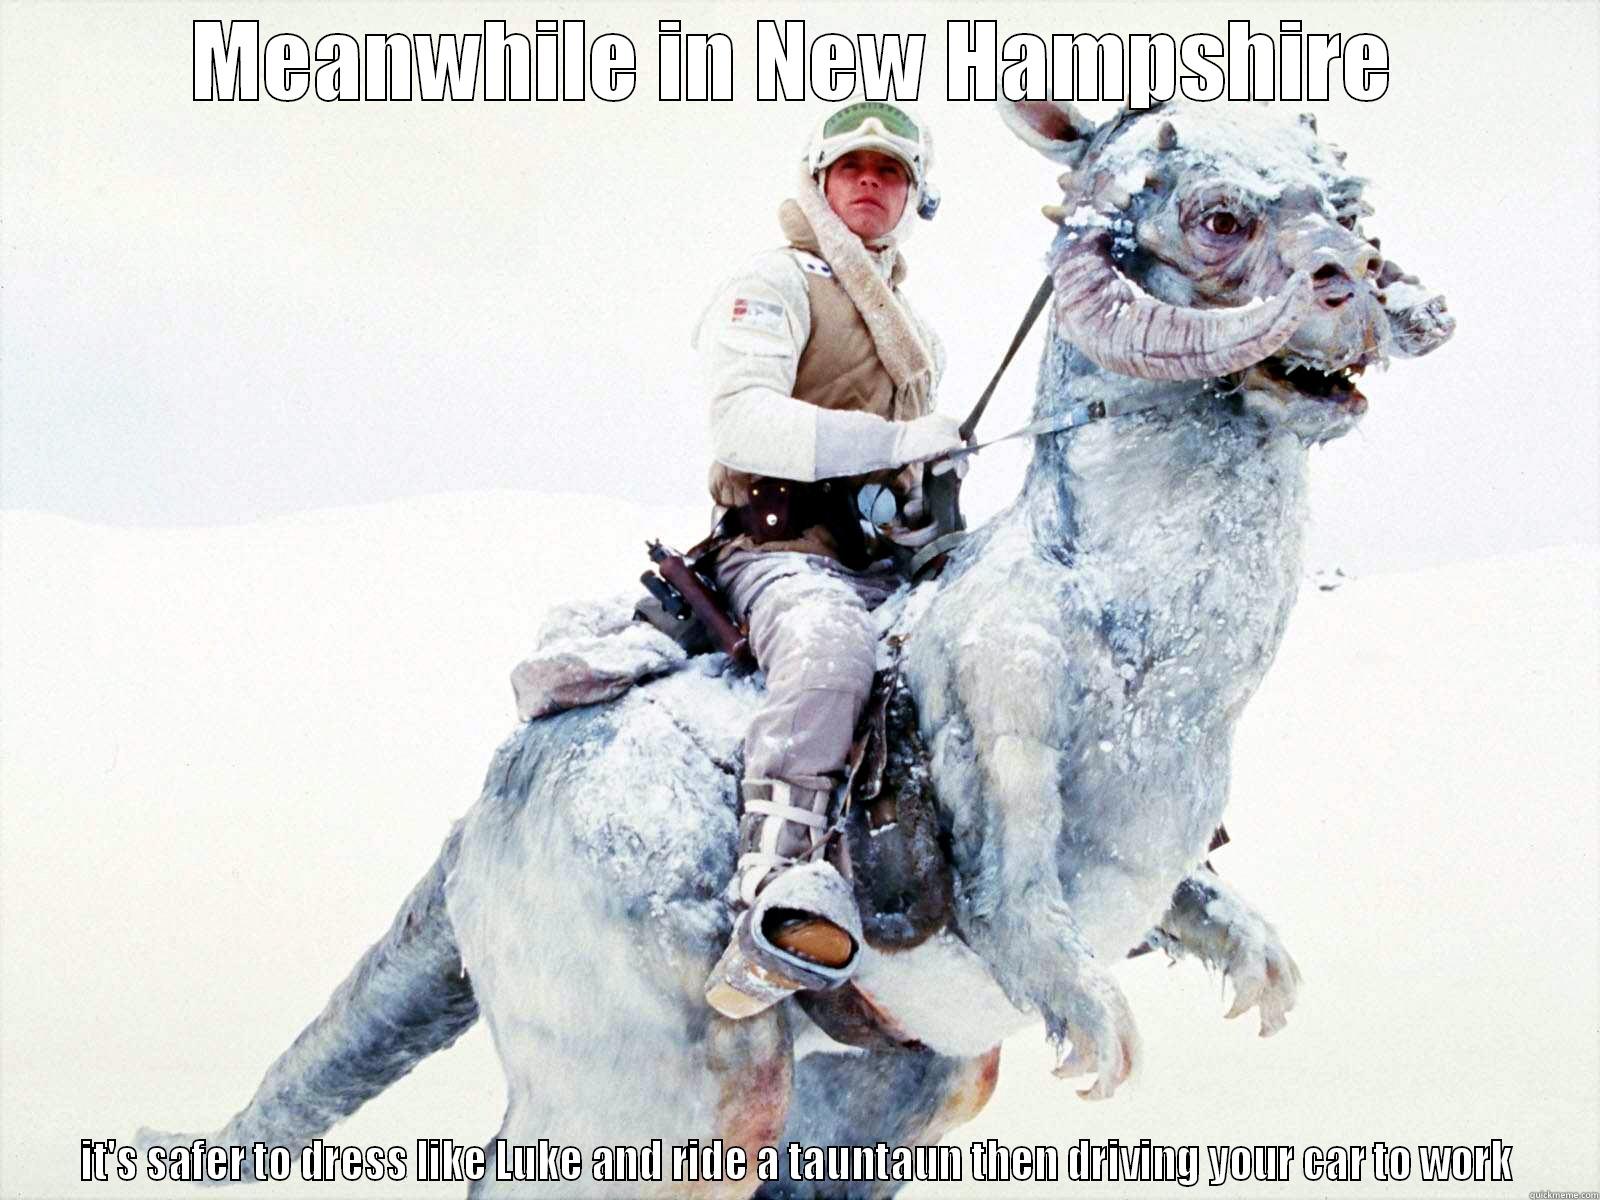 tauntaun 2 - MEANWHILE IN NEW HAMPSHIRE IT'S SAFER TO DRESS LIKE LUKE AND RIDE A TAUNTAUN THEN DRIVING YOUR CAR TO WORK Misc